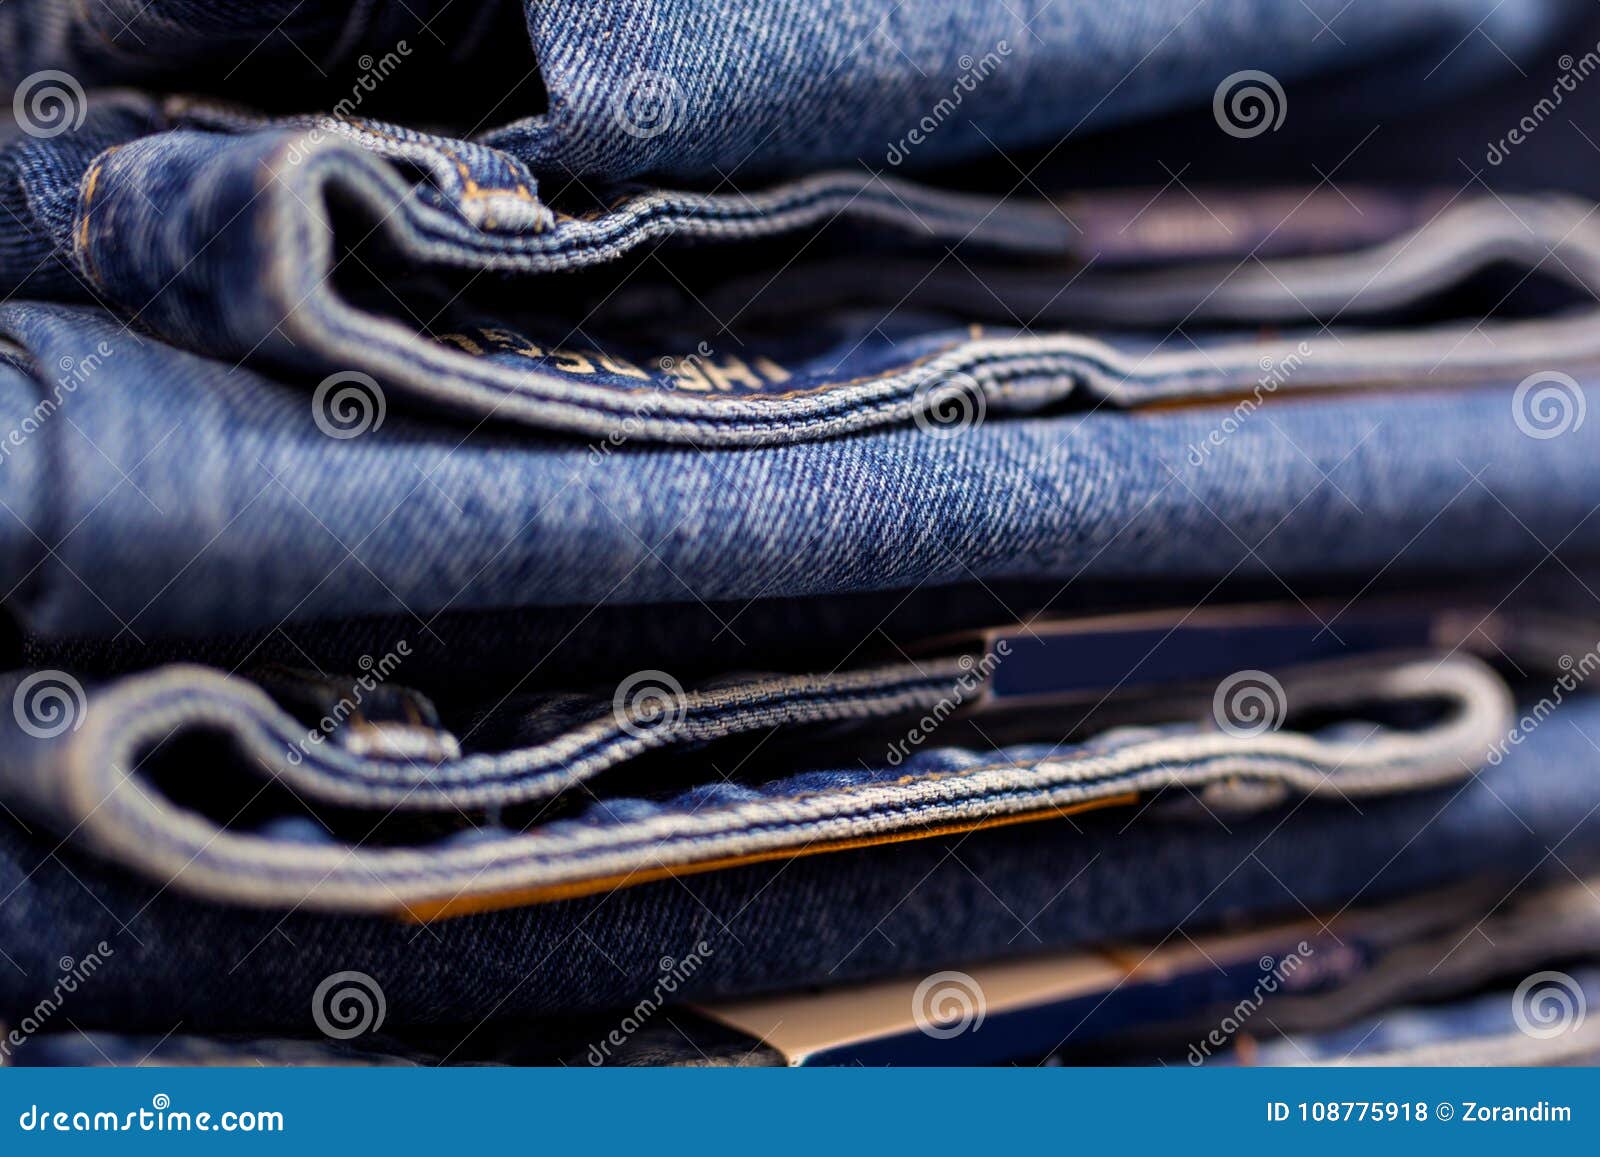 Row of Hanged Blue Jeans in a Shop Stock Photo - Image of pattern ...